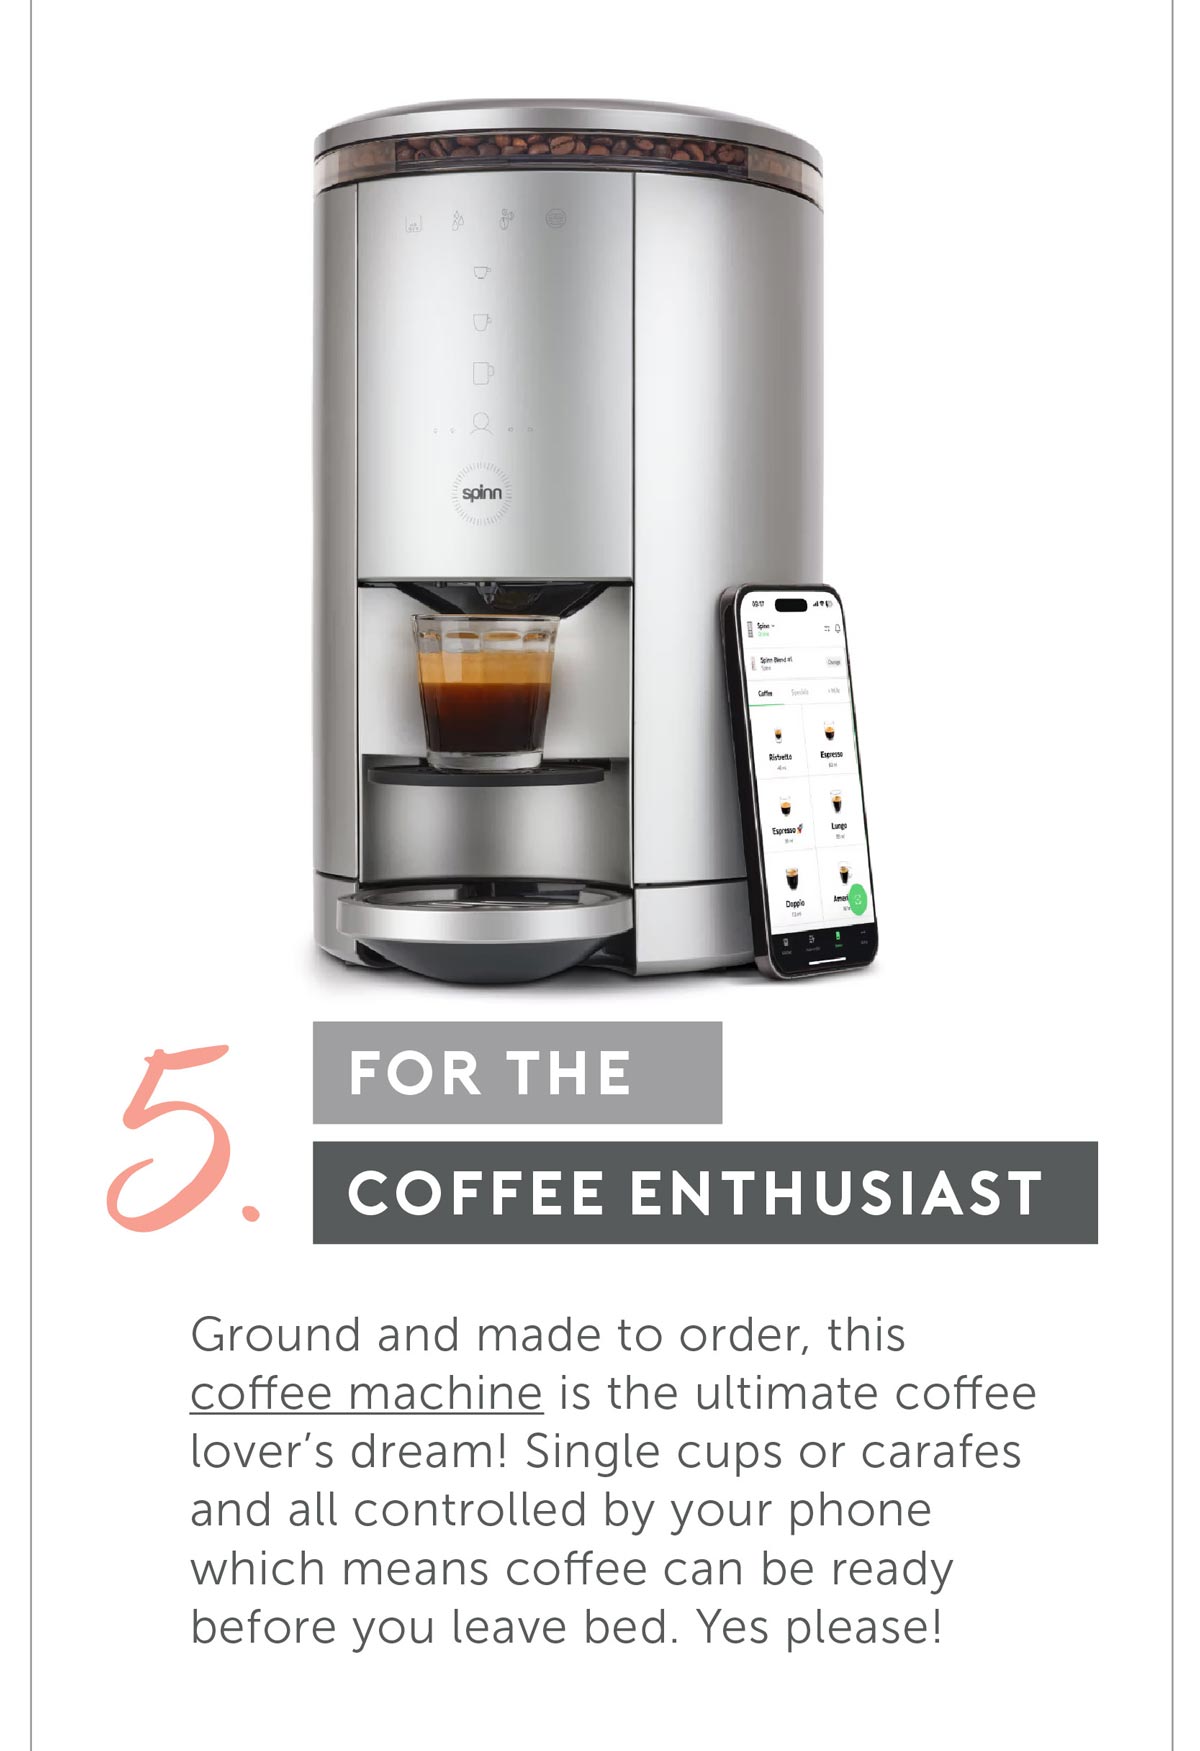 For The Coffee Enthusiast. Ground and made to order, this coffee machine is the ultimate coffee lover’s dream! Single cups or carafes and all controlled by your phone- which means- coffee can be reedy before you leave bed- Yes please!